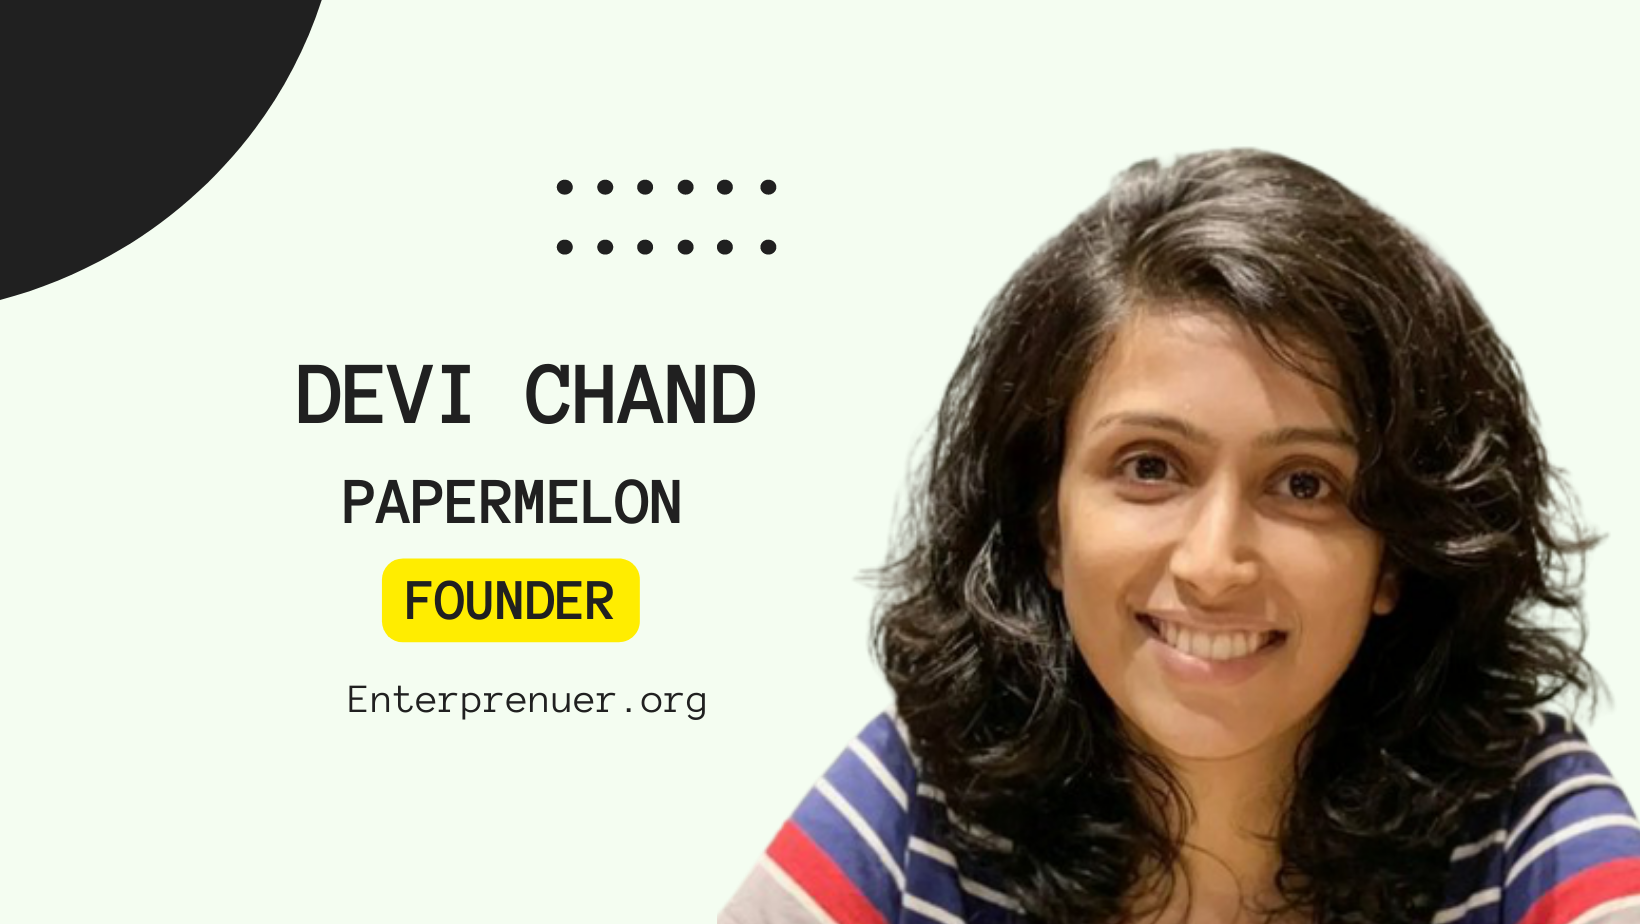 Devi Chand Founder of Papermelon